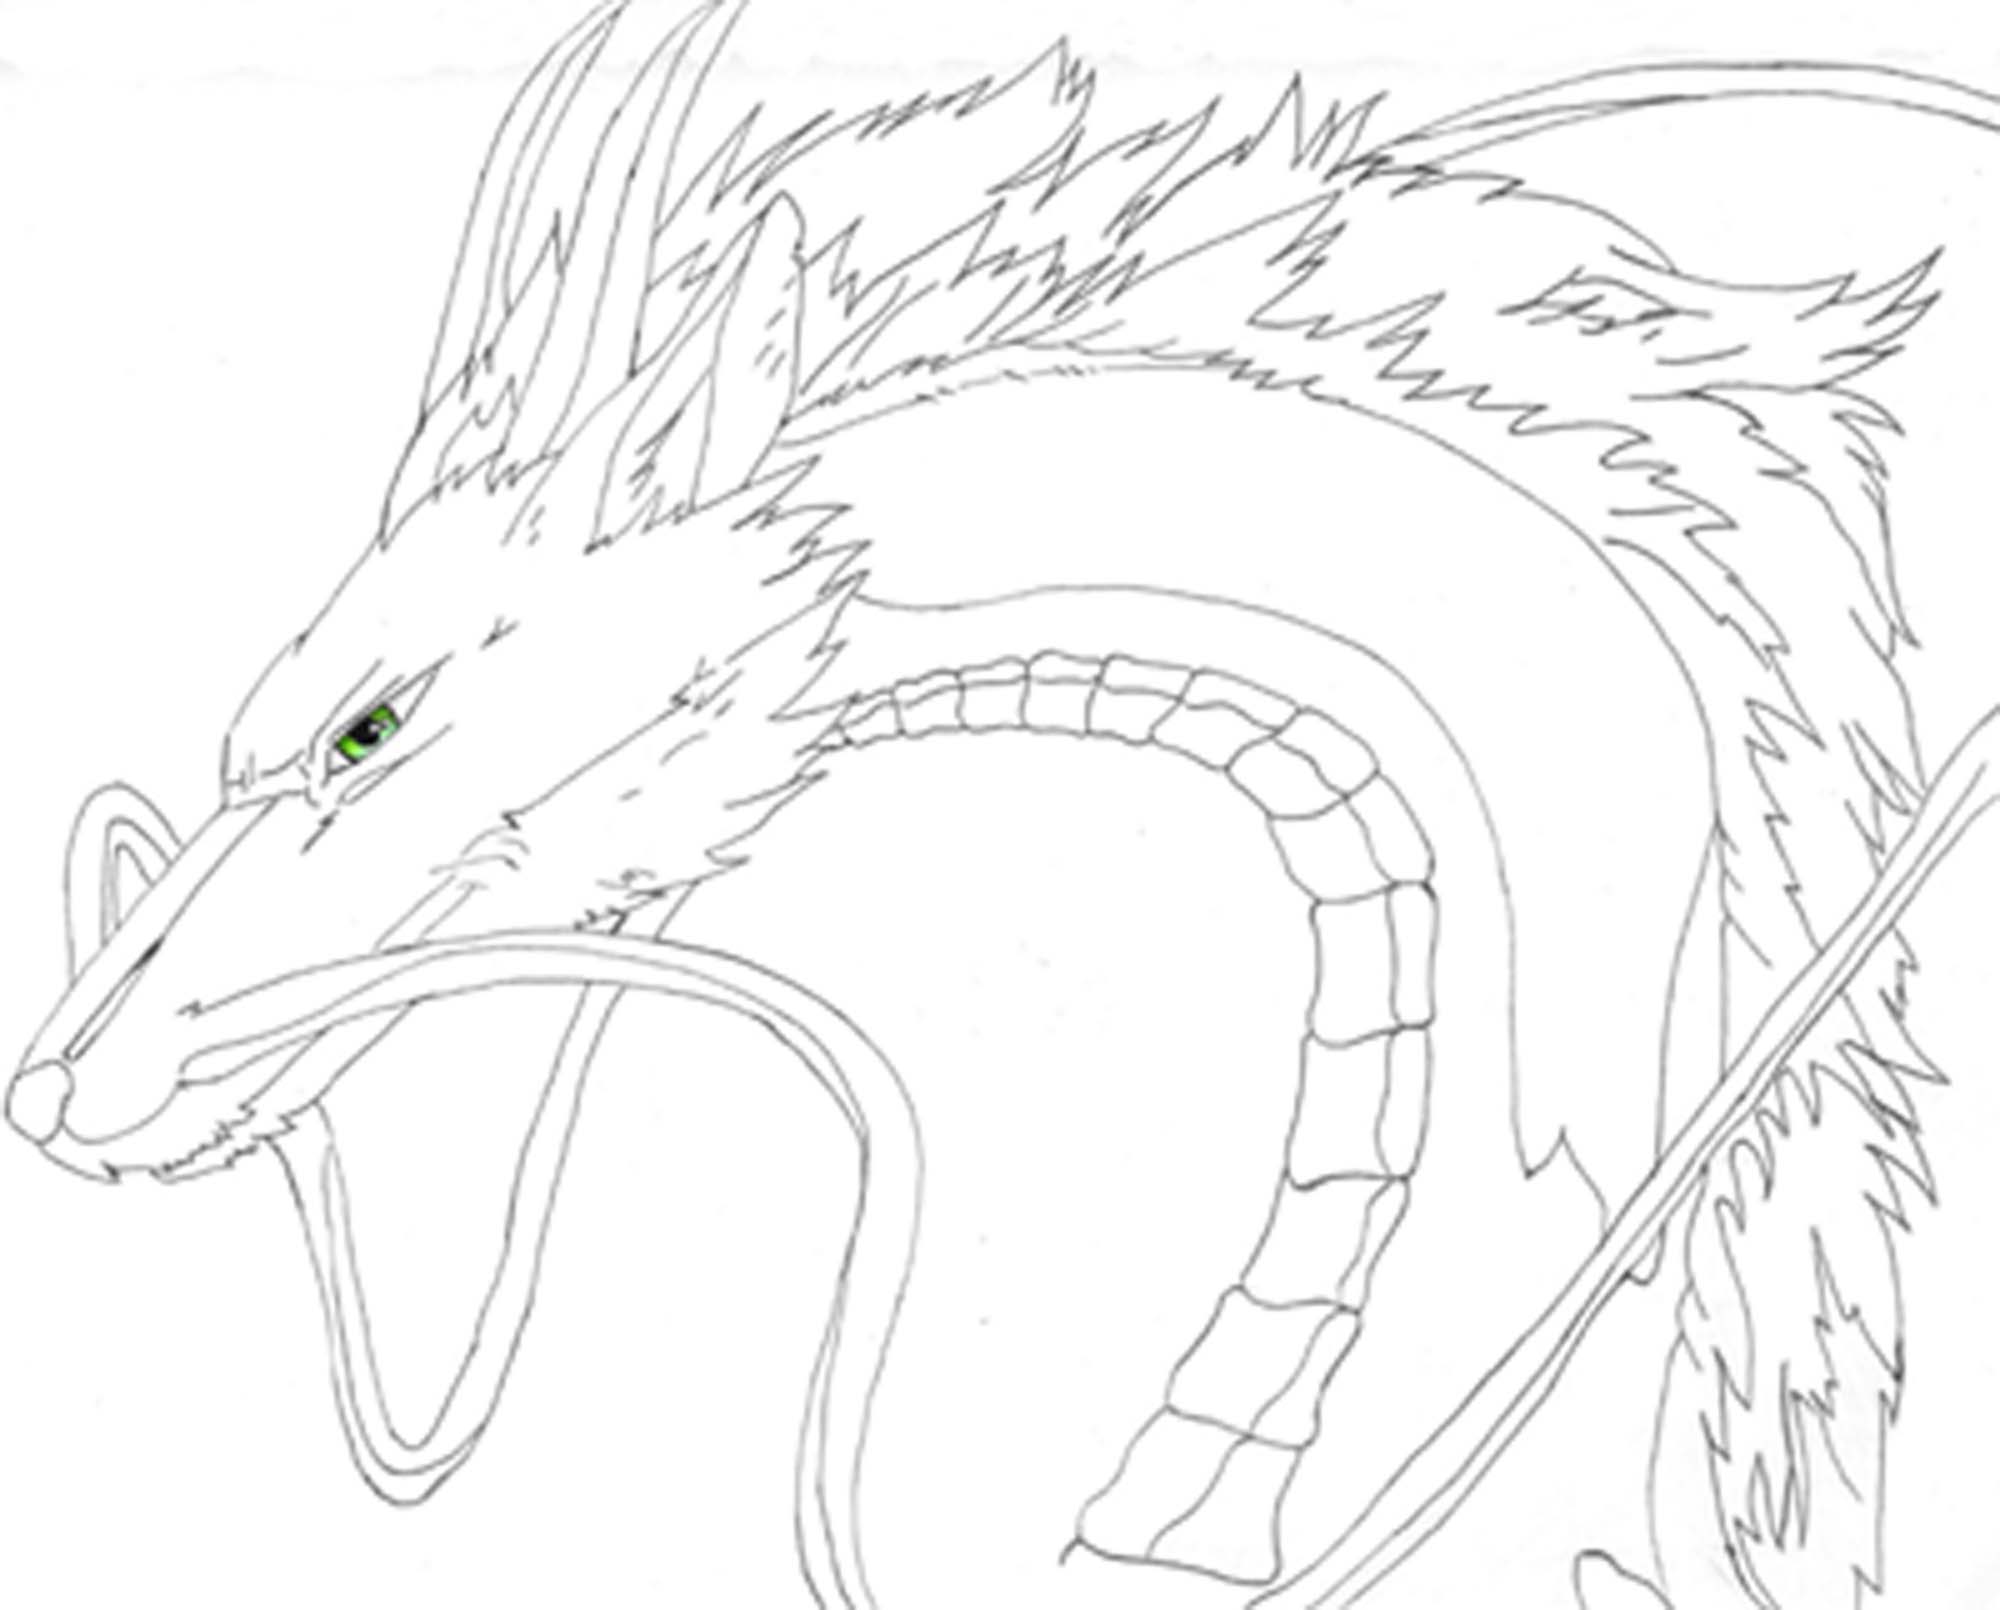 Haku in Dragon Form by gravitate2thelove